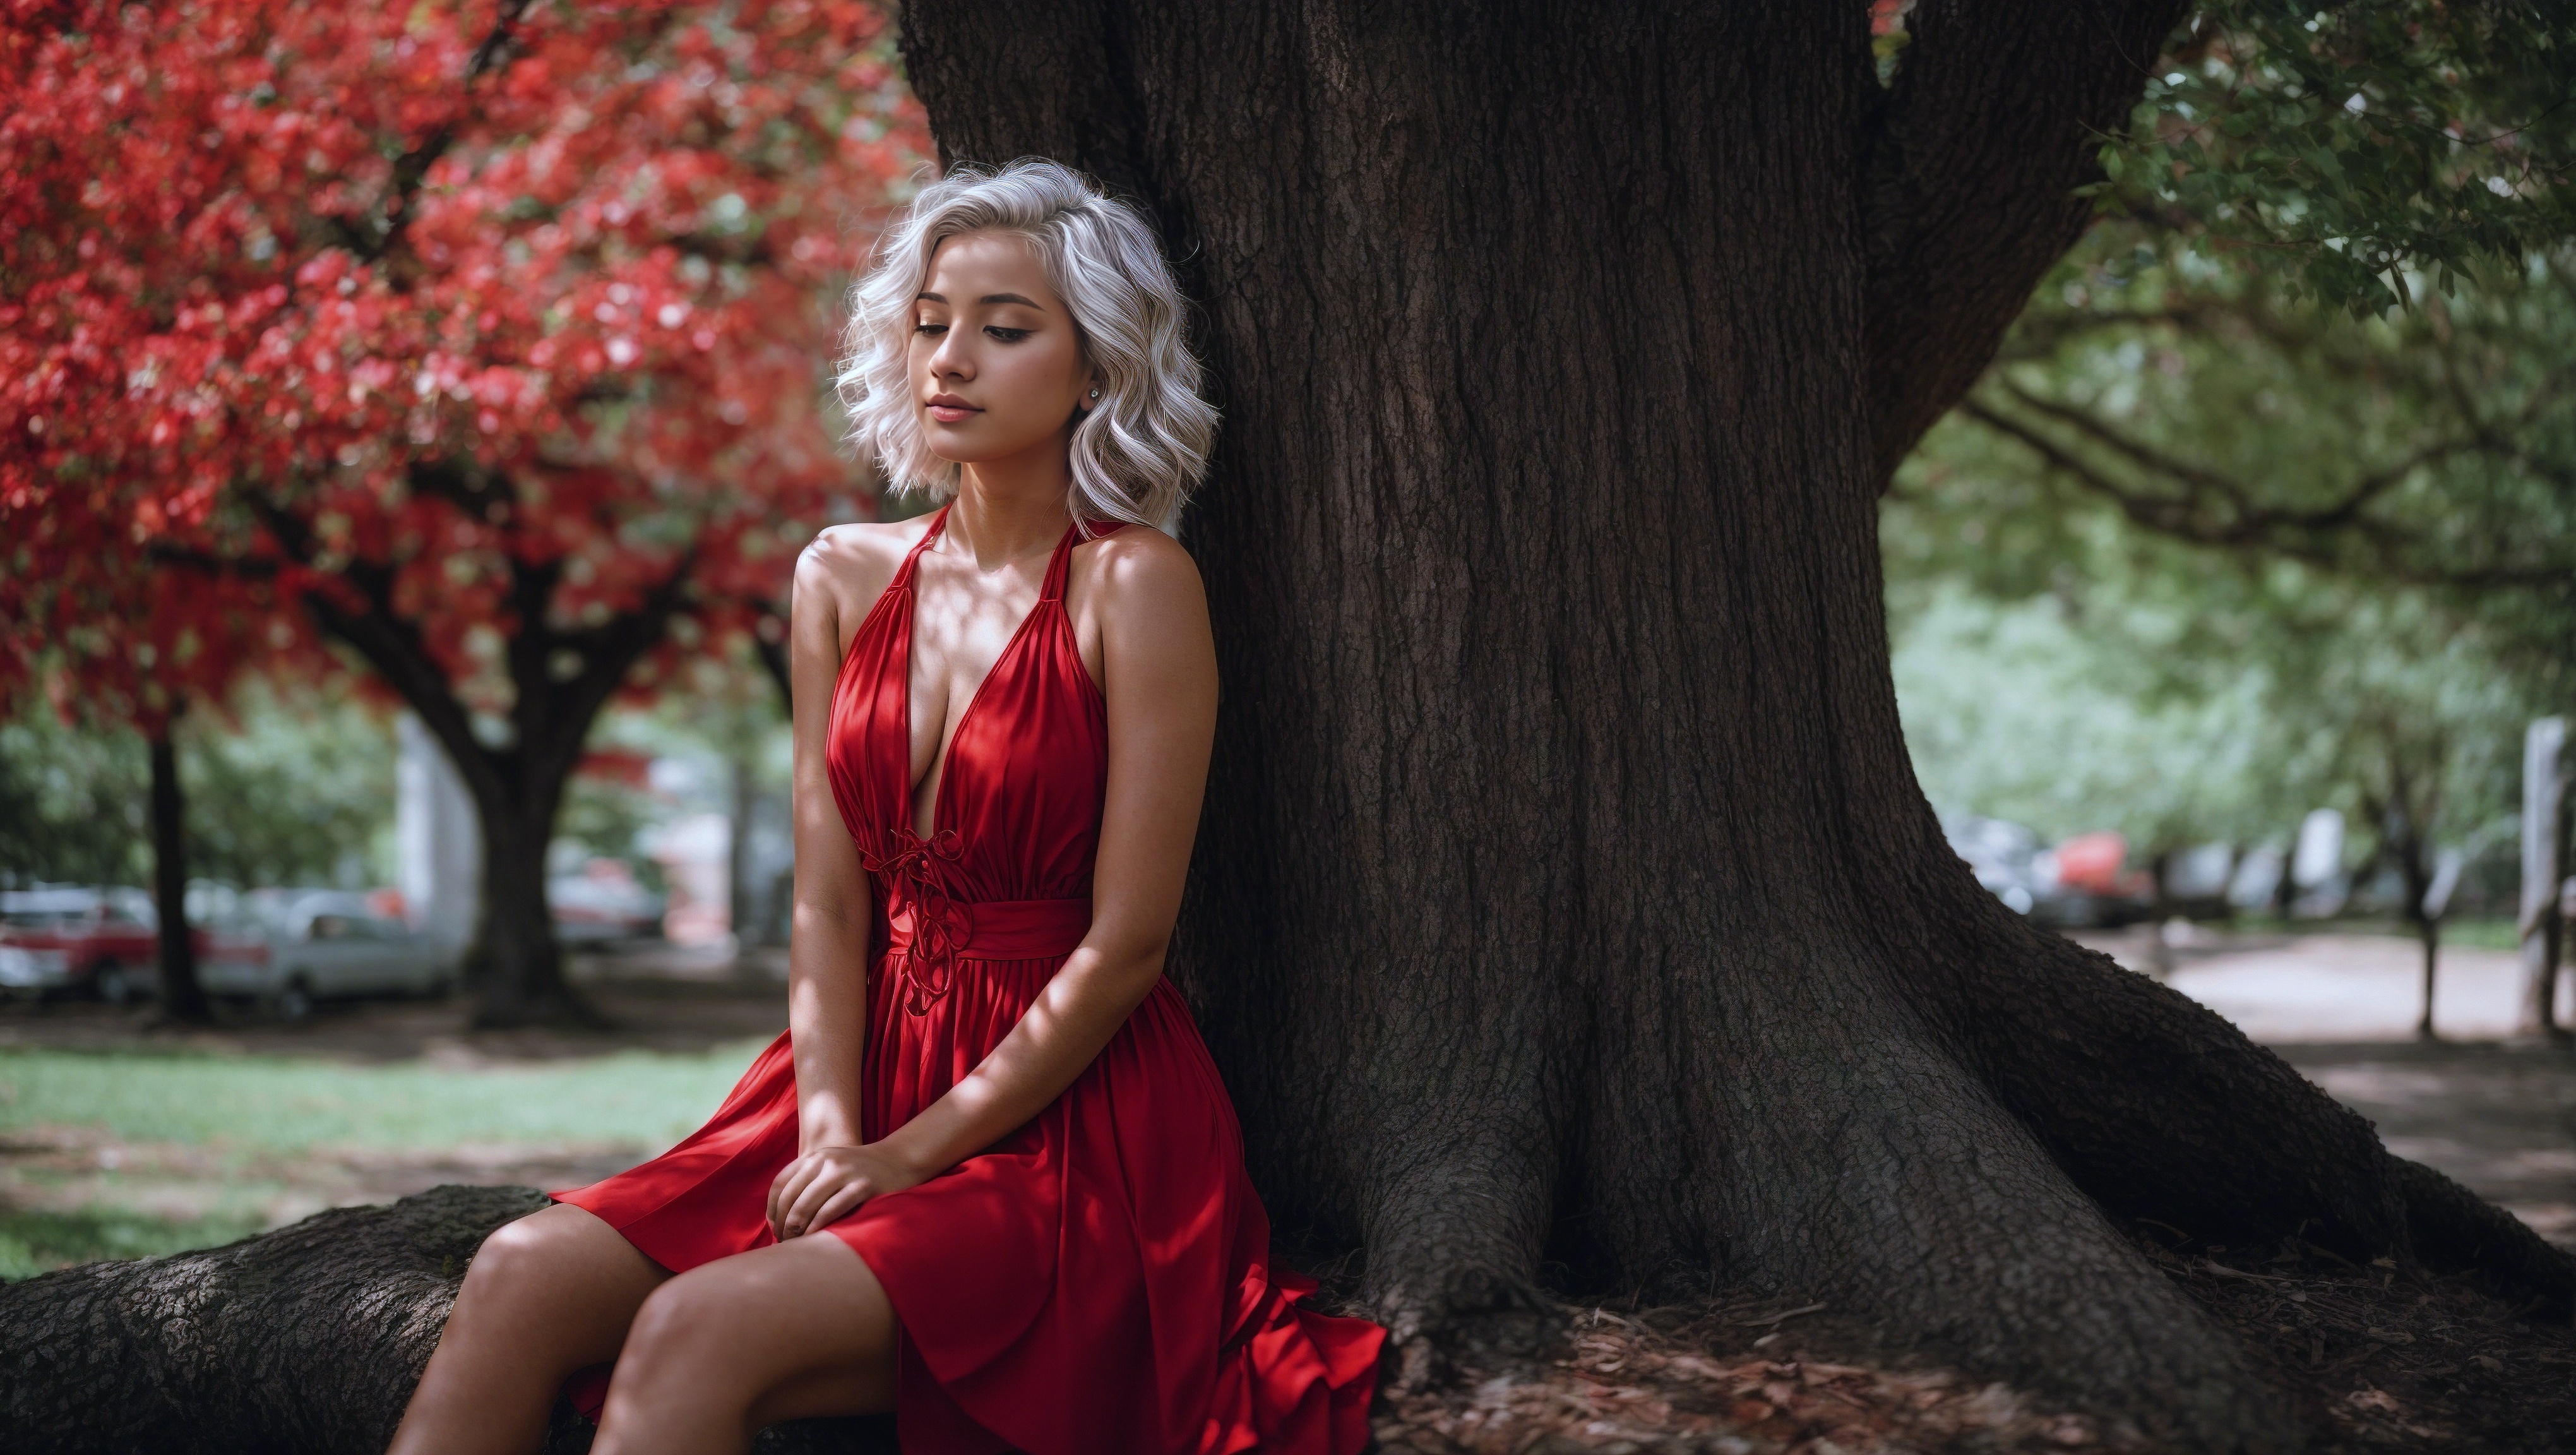 A woman sitting in front of a tree while wearing a red dress